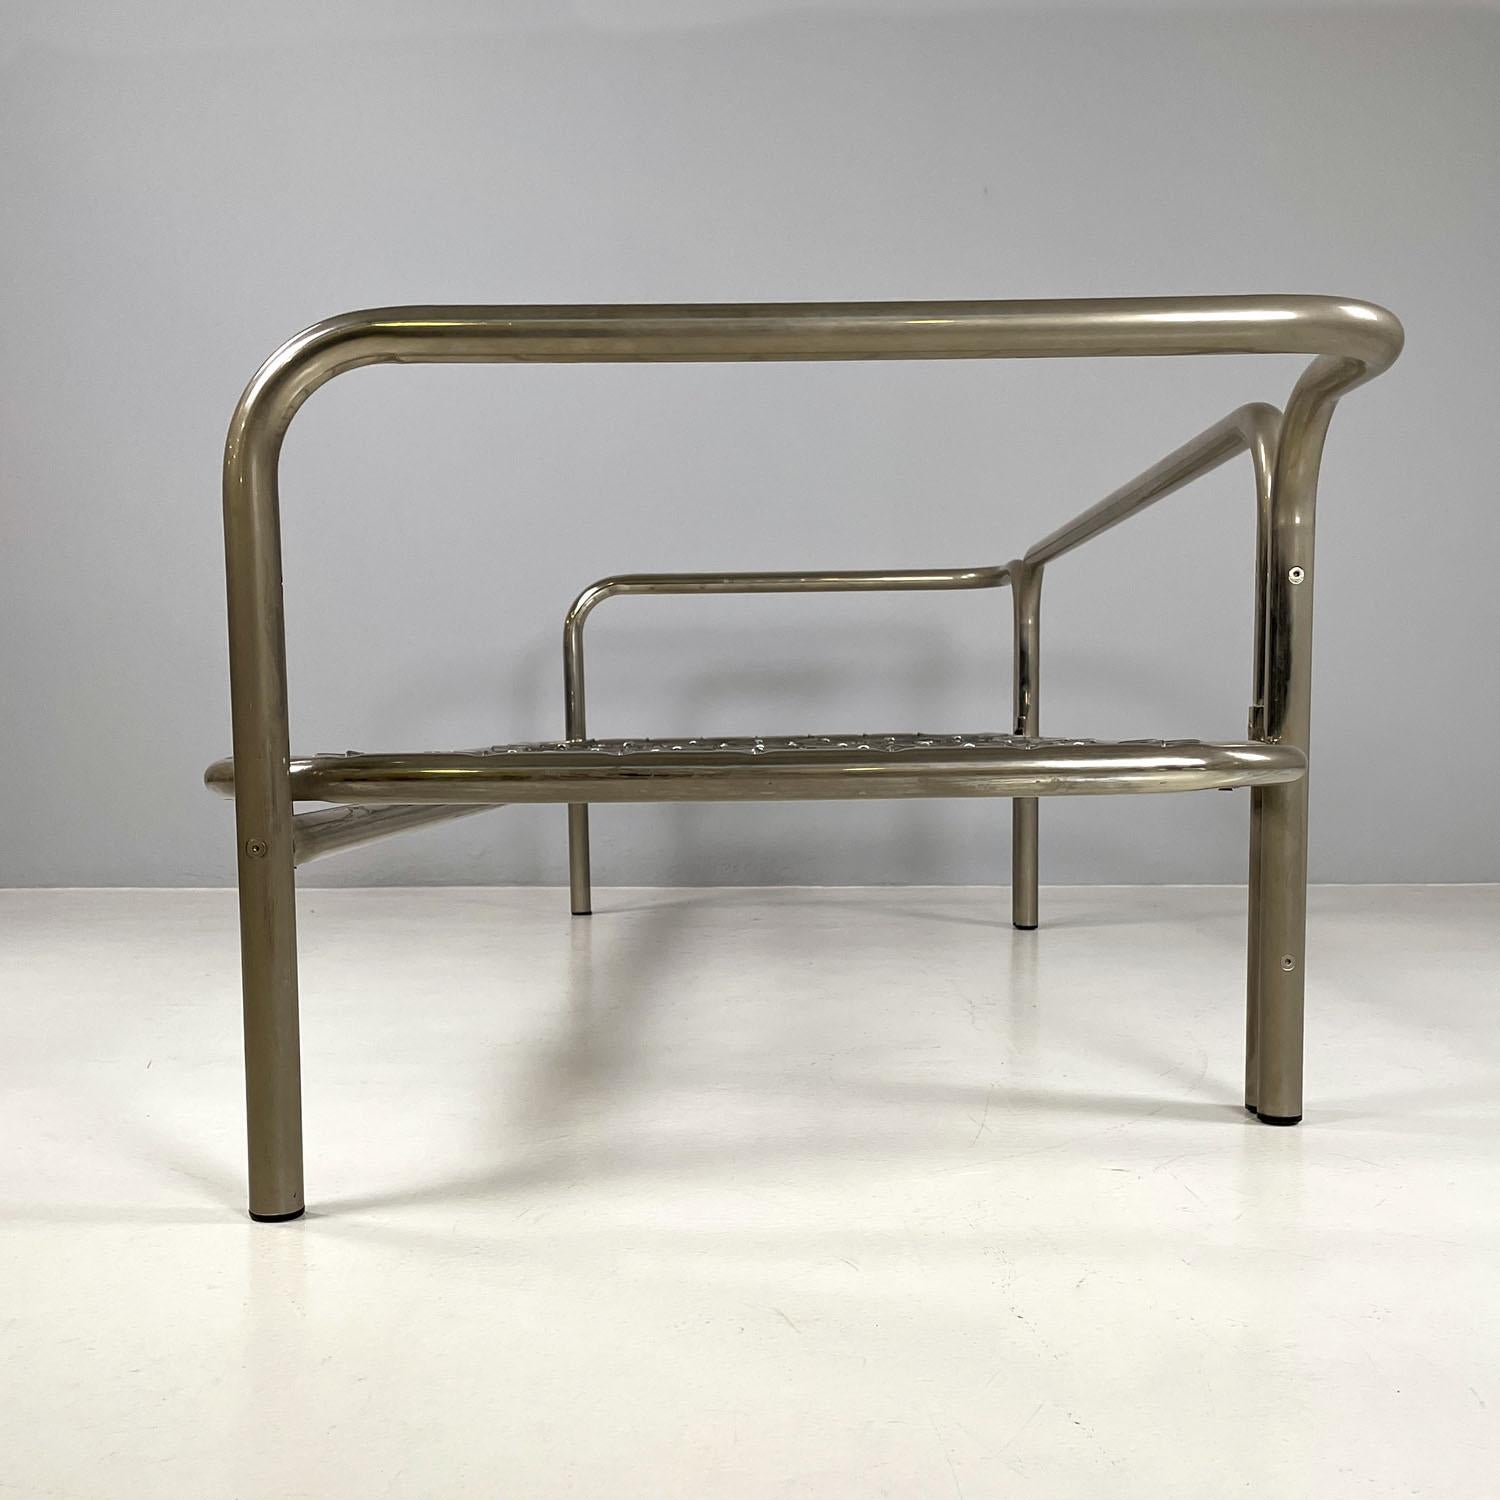 Italian modern daybed sofa Locus Solus by Gae Aulenti for Poltronova, 1970s For Sale 1